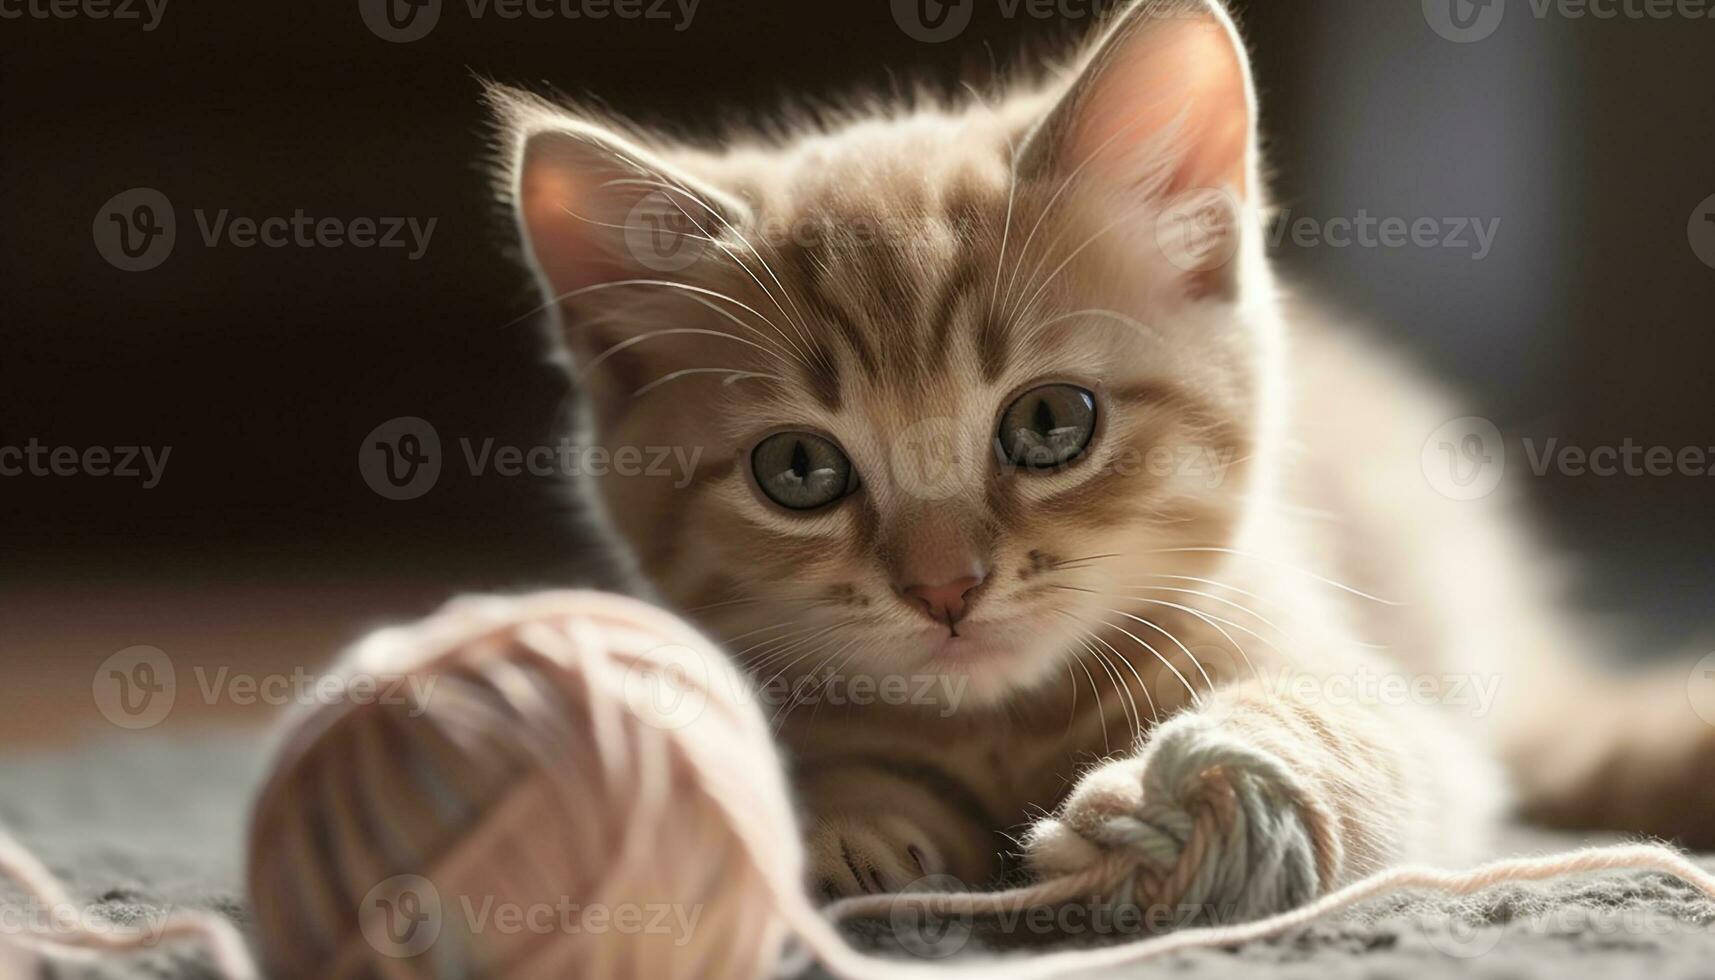 A playful, small, fluffy kitten with striped fur sits comfortably generated by AI photo